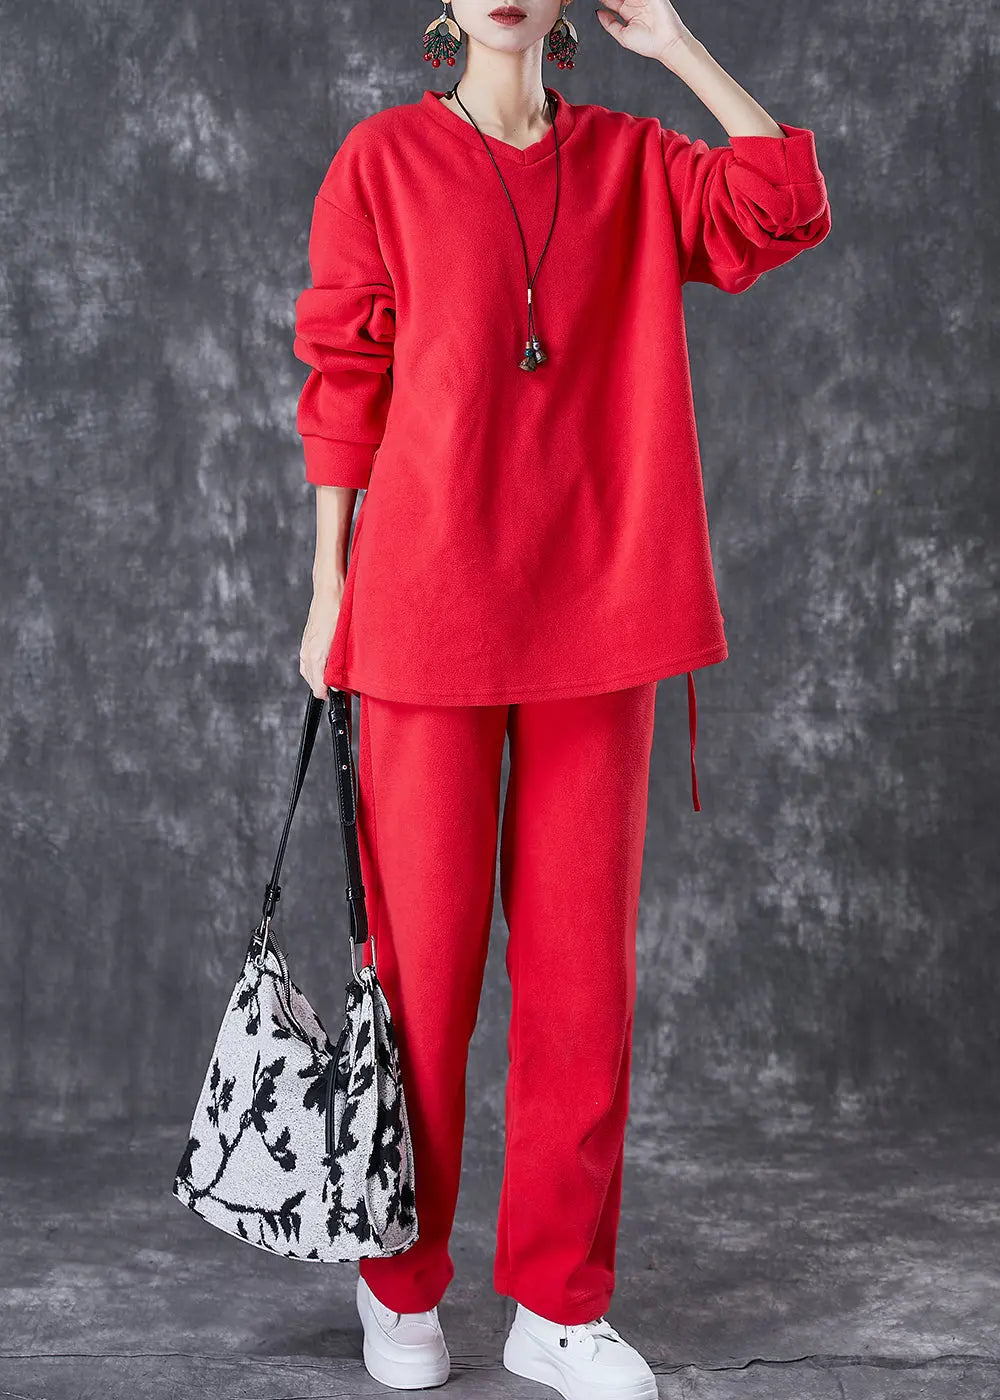 Casual Red Oversized Drawstring Velour Women Sets 2 Pieces Fall Ada Fashion